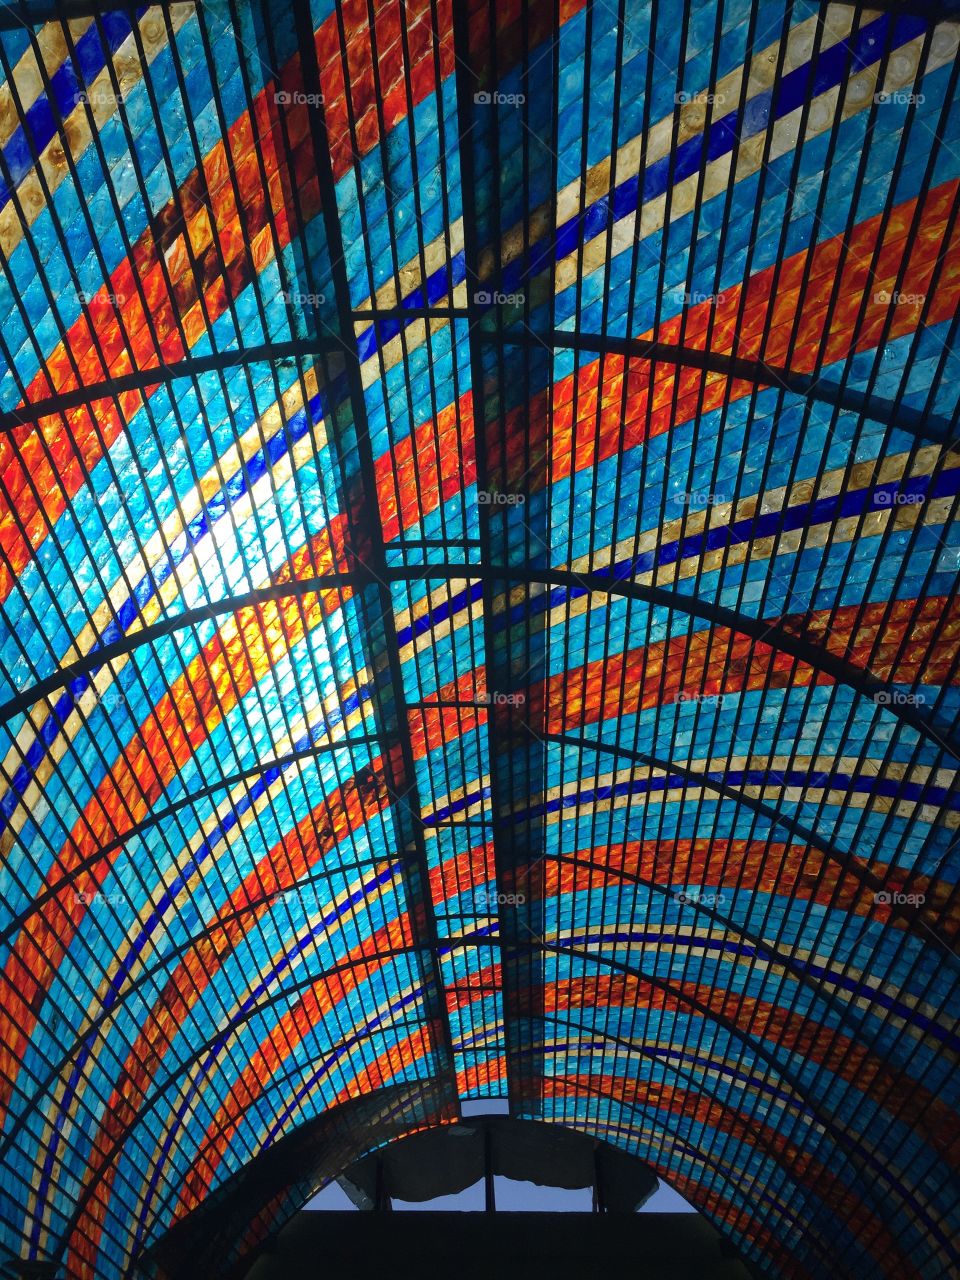 Stunning blue and red glass curved ceiling in a glass shop in Cabo San Lucas in the Mexican Riviera